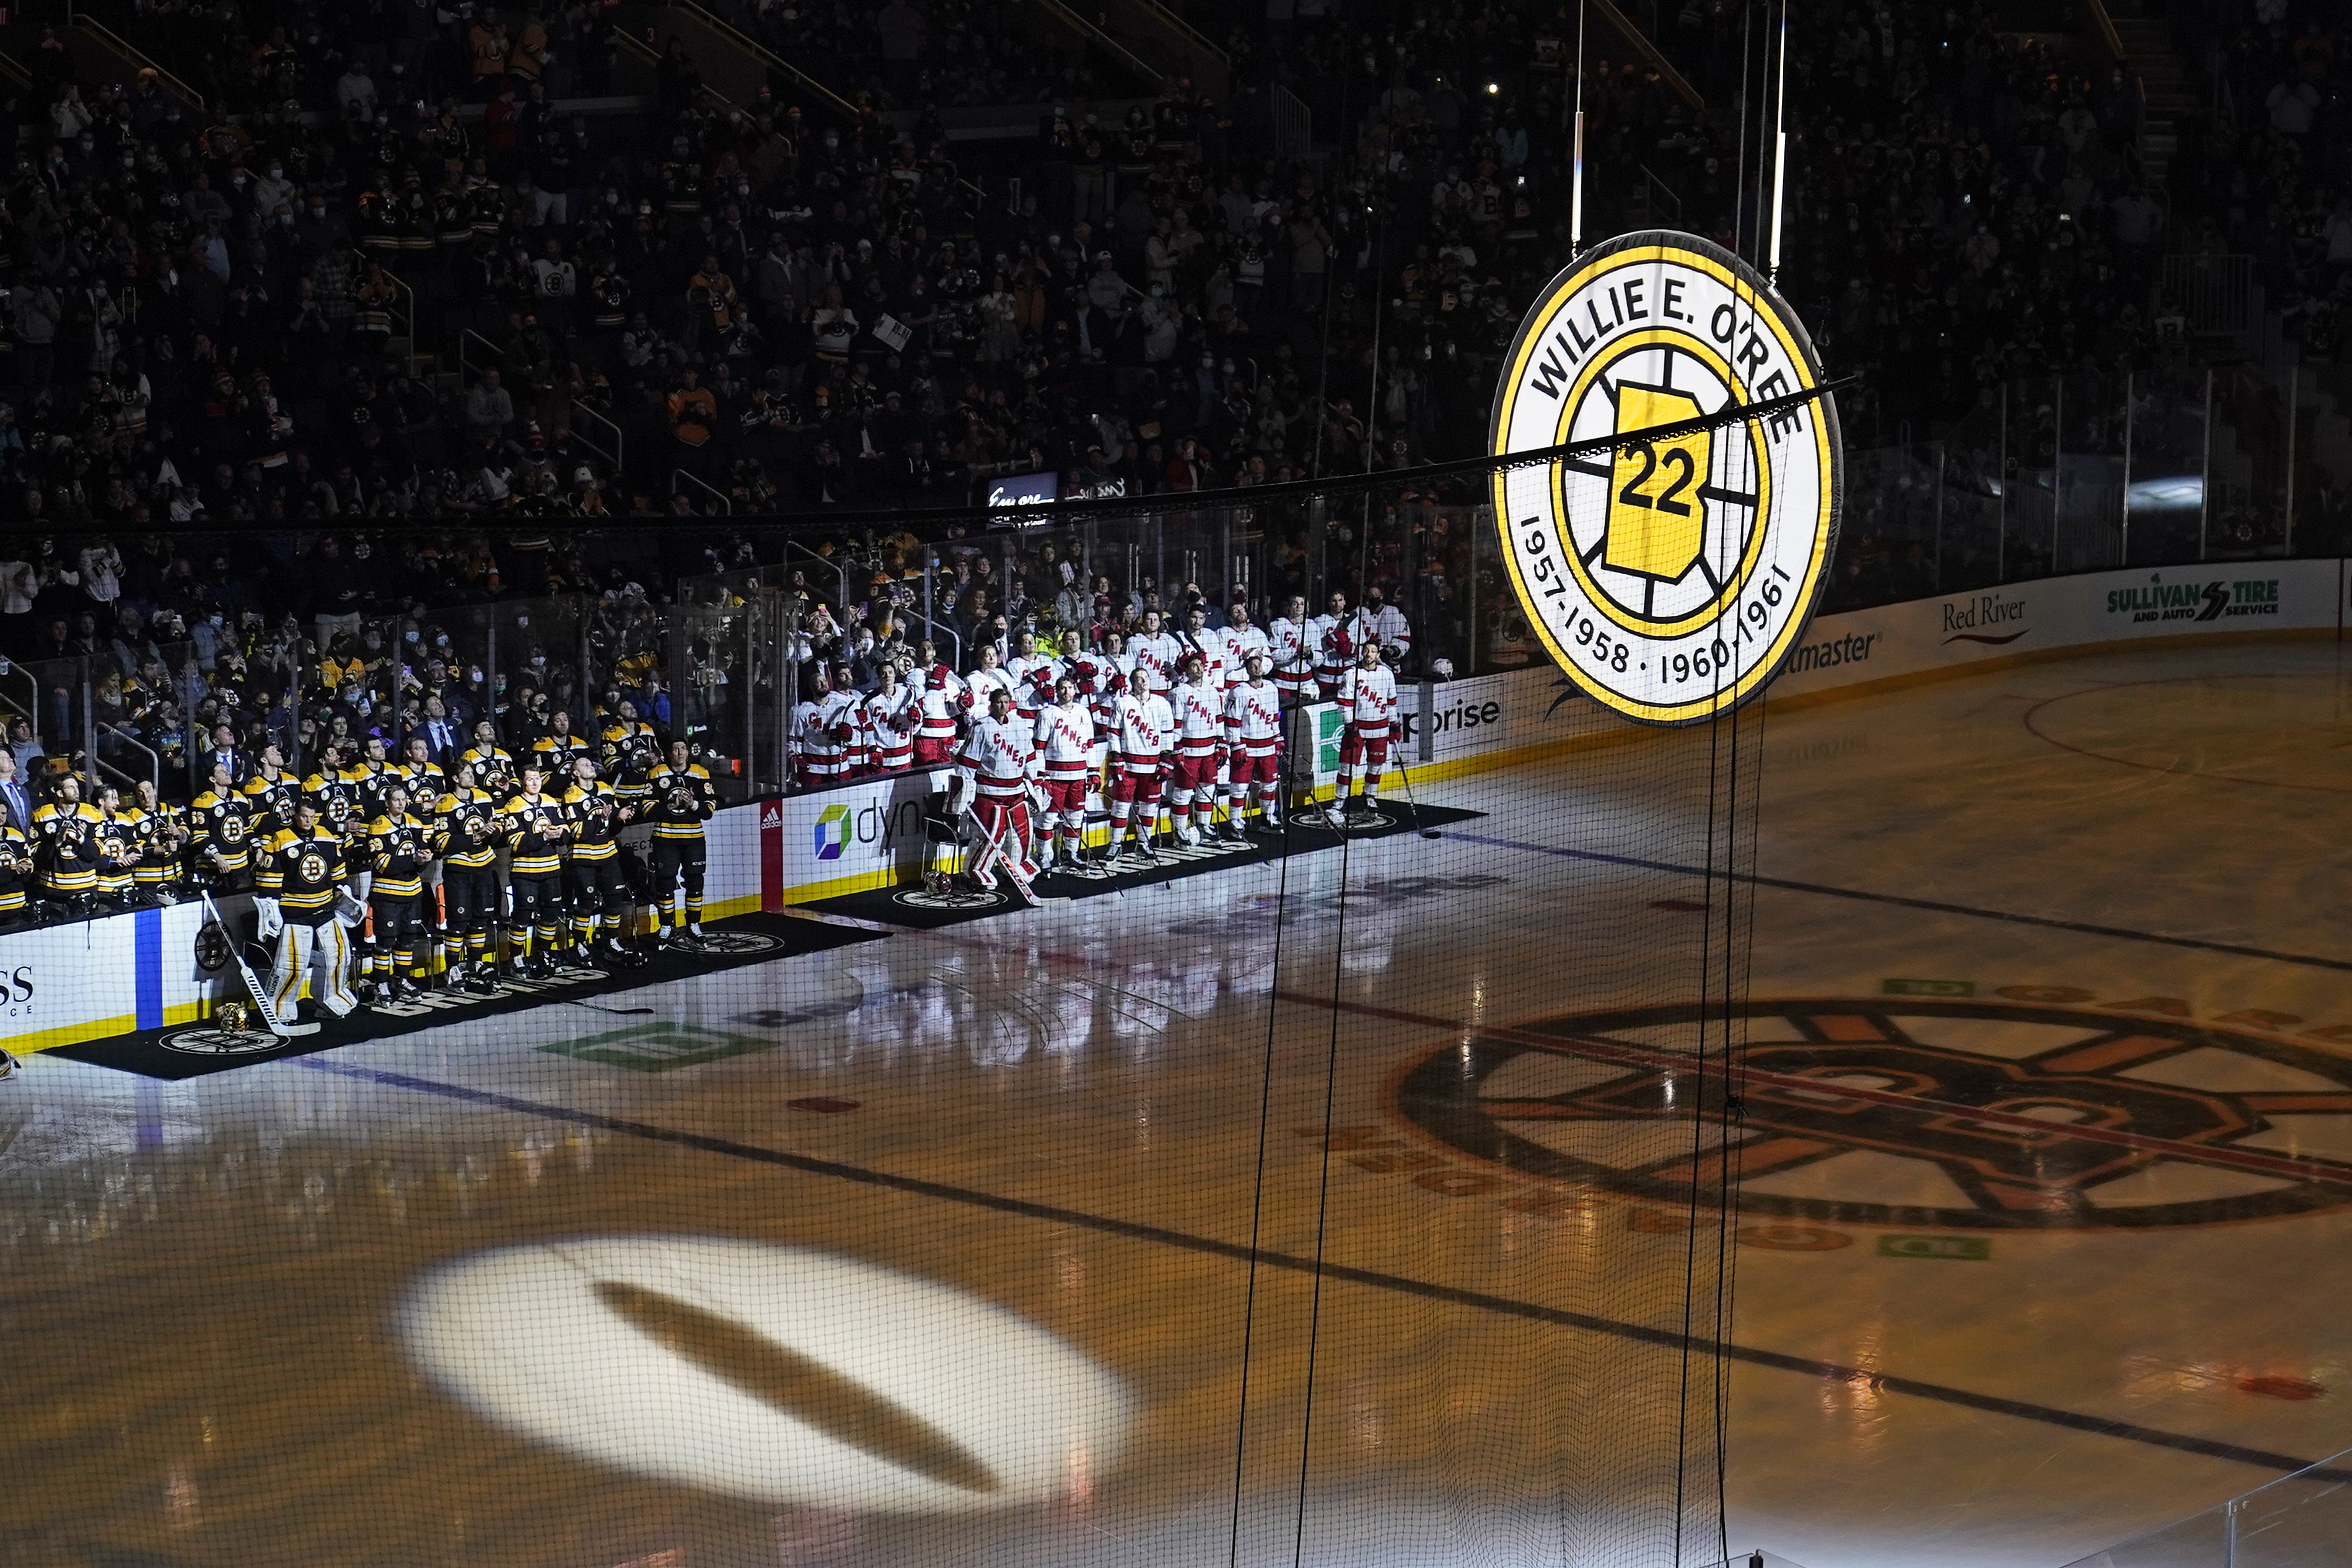 NHL pioneer O'Ree says having Bruins retire jersey an honor